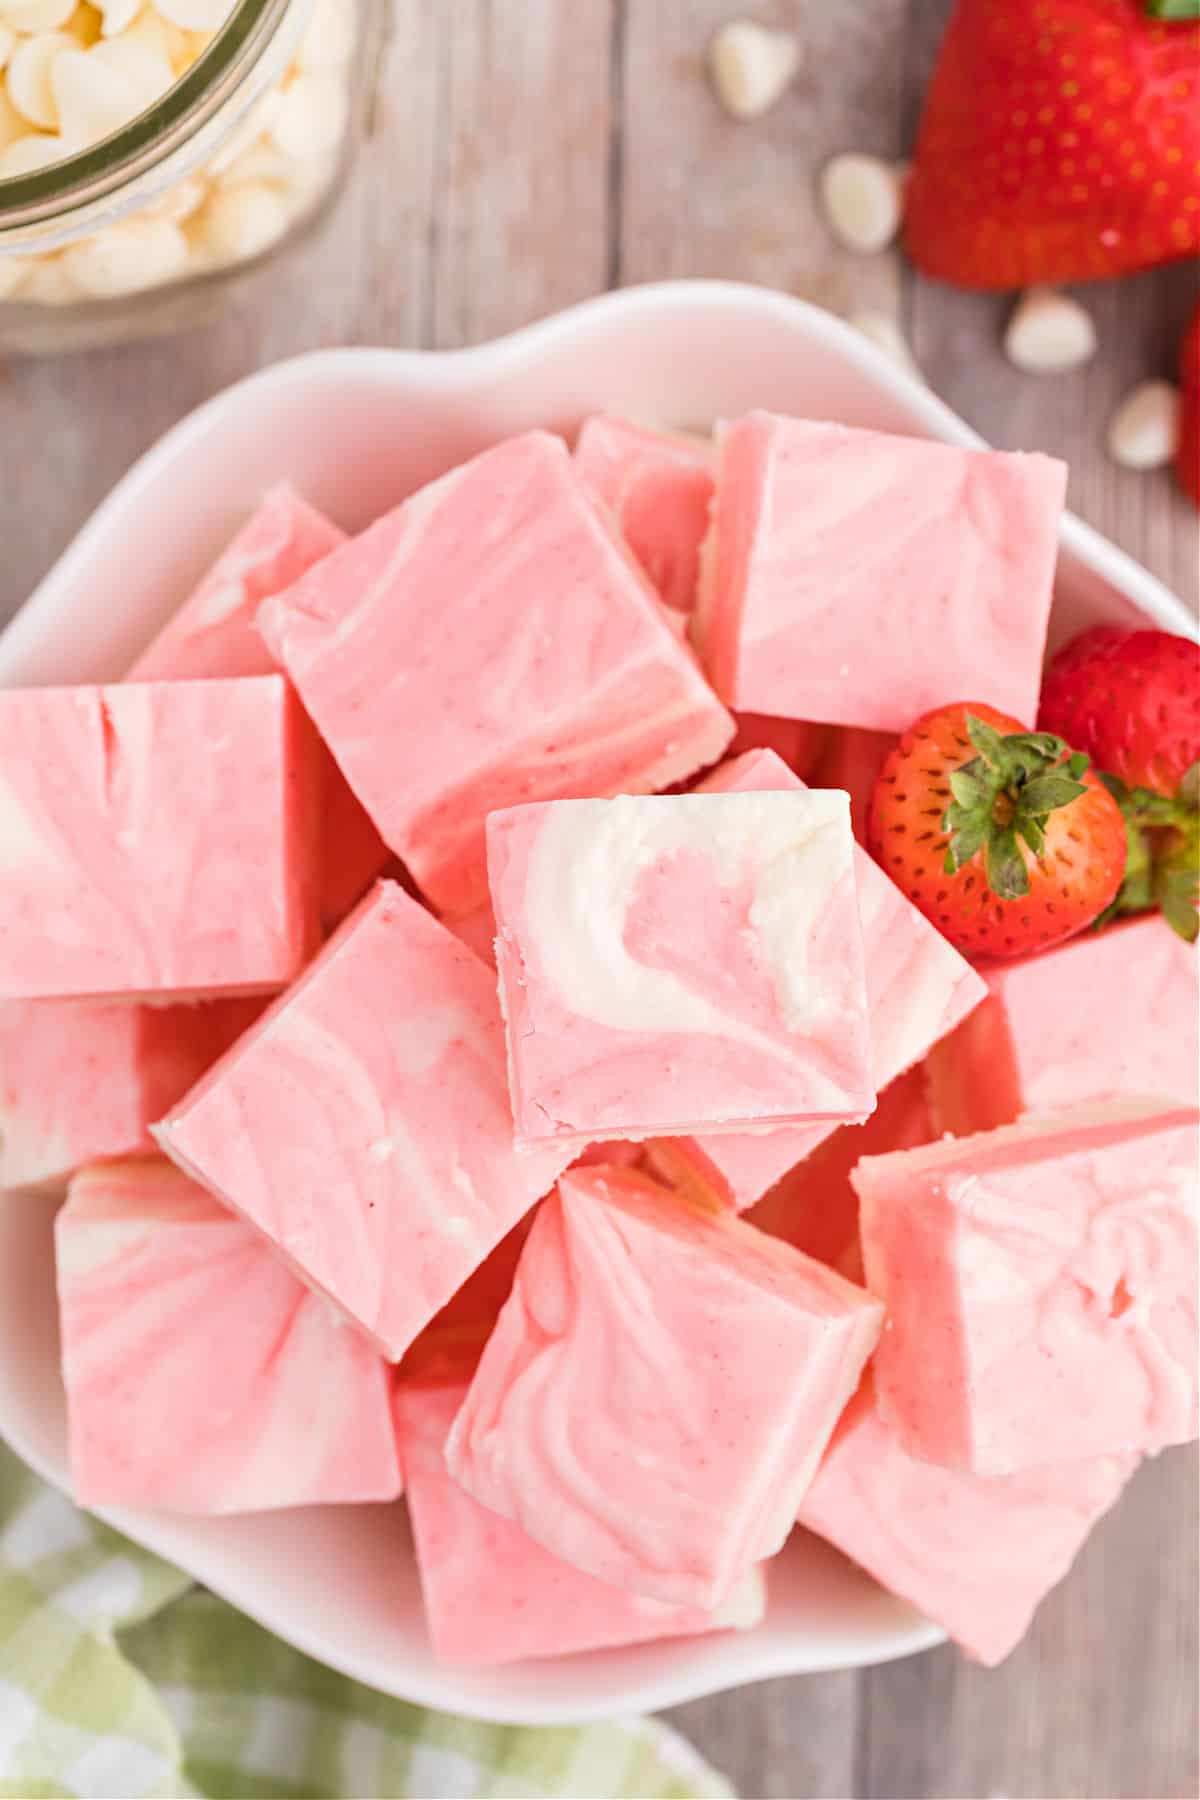 Pieces of strawberry fudge in a white bowl.